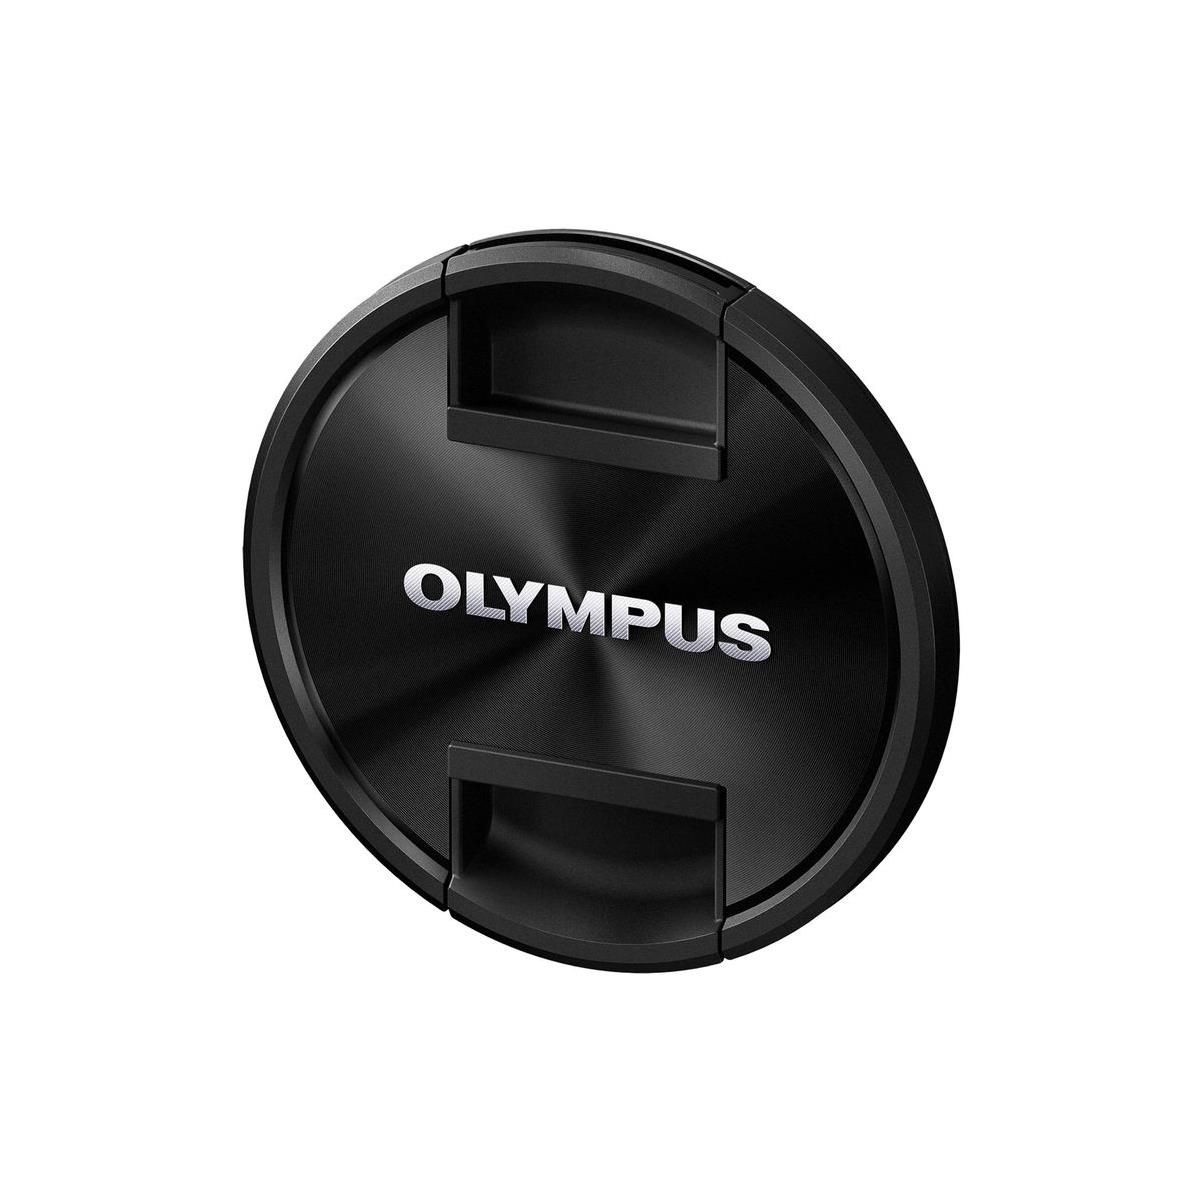 Image of Olympus Replacement Lens Cap for the M. Zuiko ED 300mm f4.0 PRO Lens